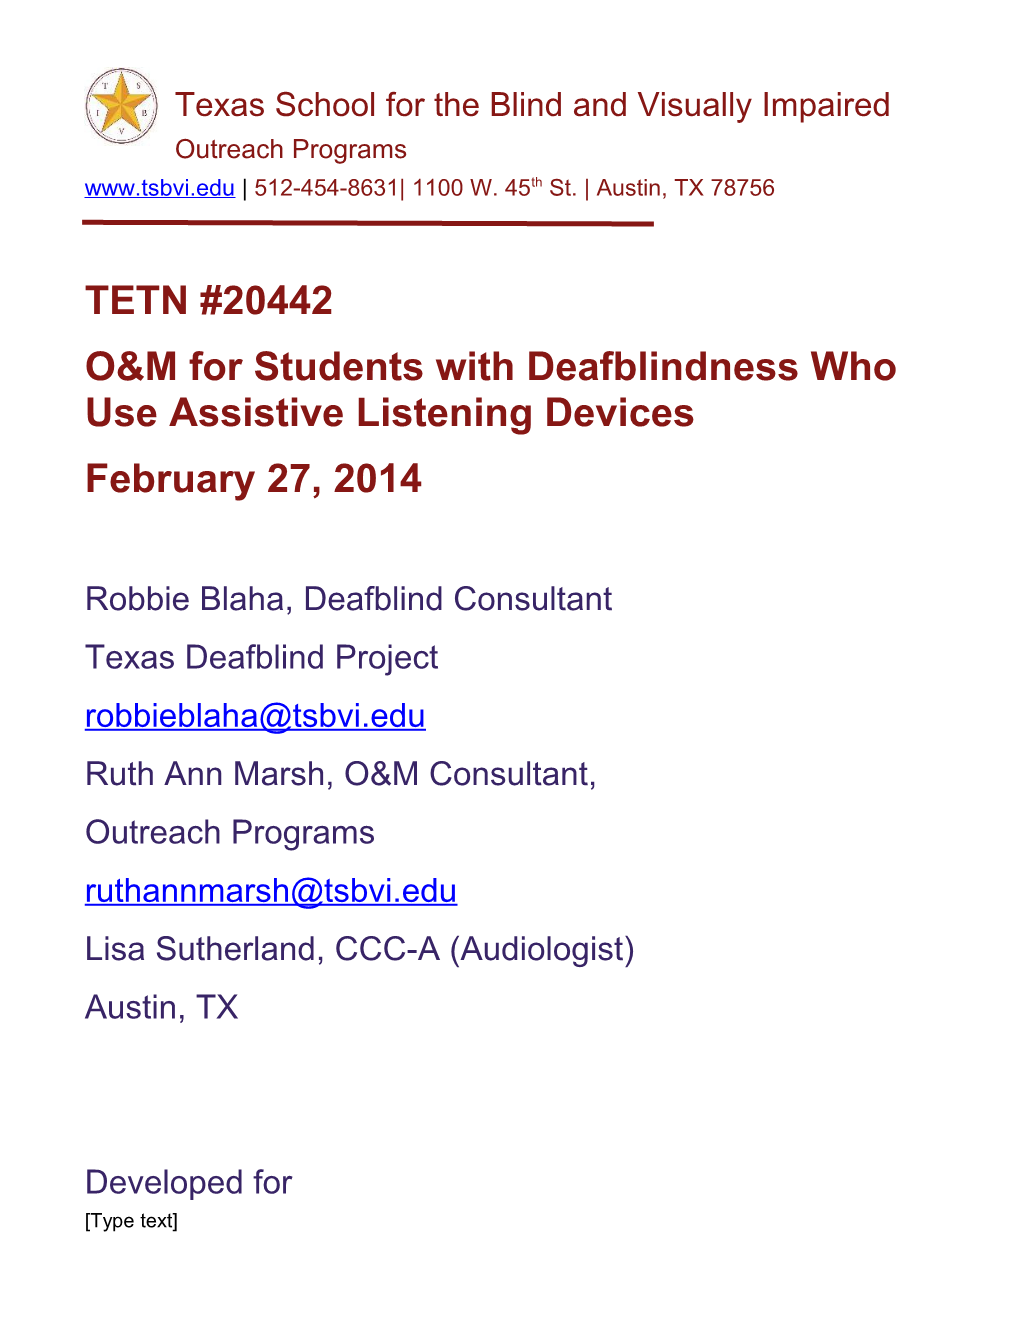 O&M for Students with Deafblindness Who Use Assistive Listening Devices